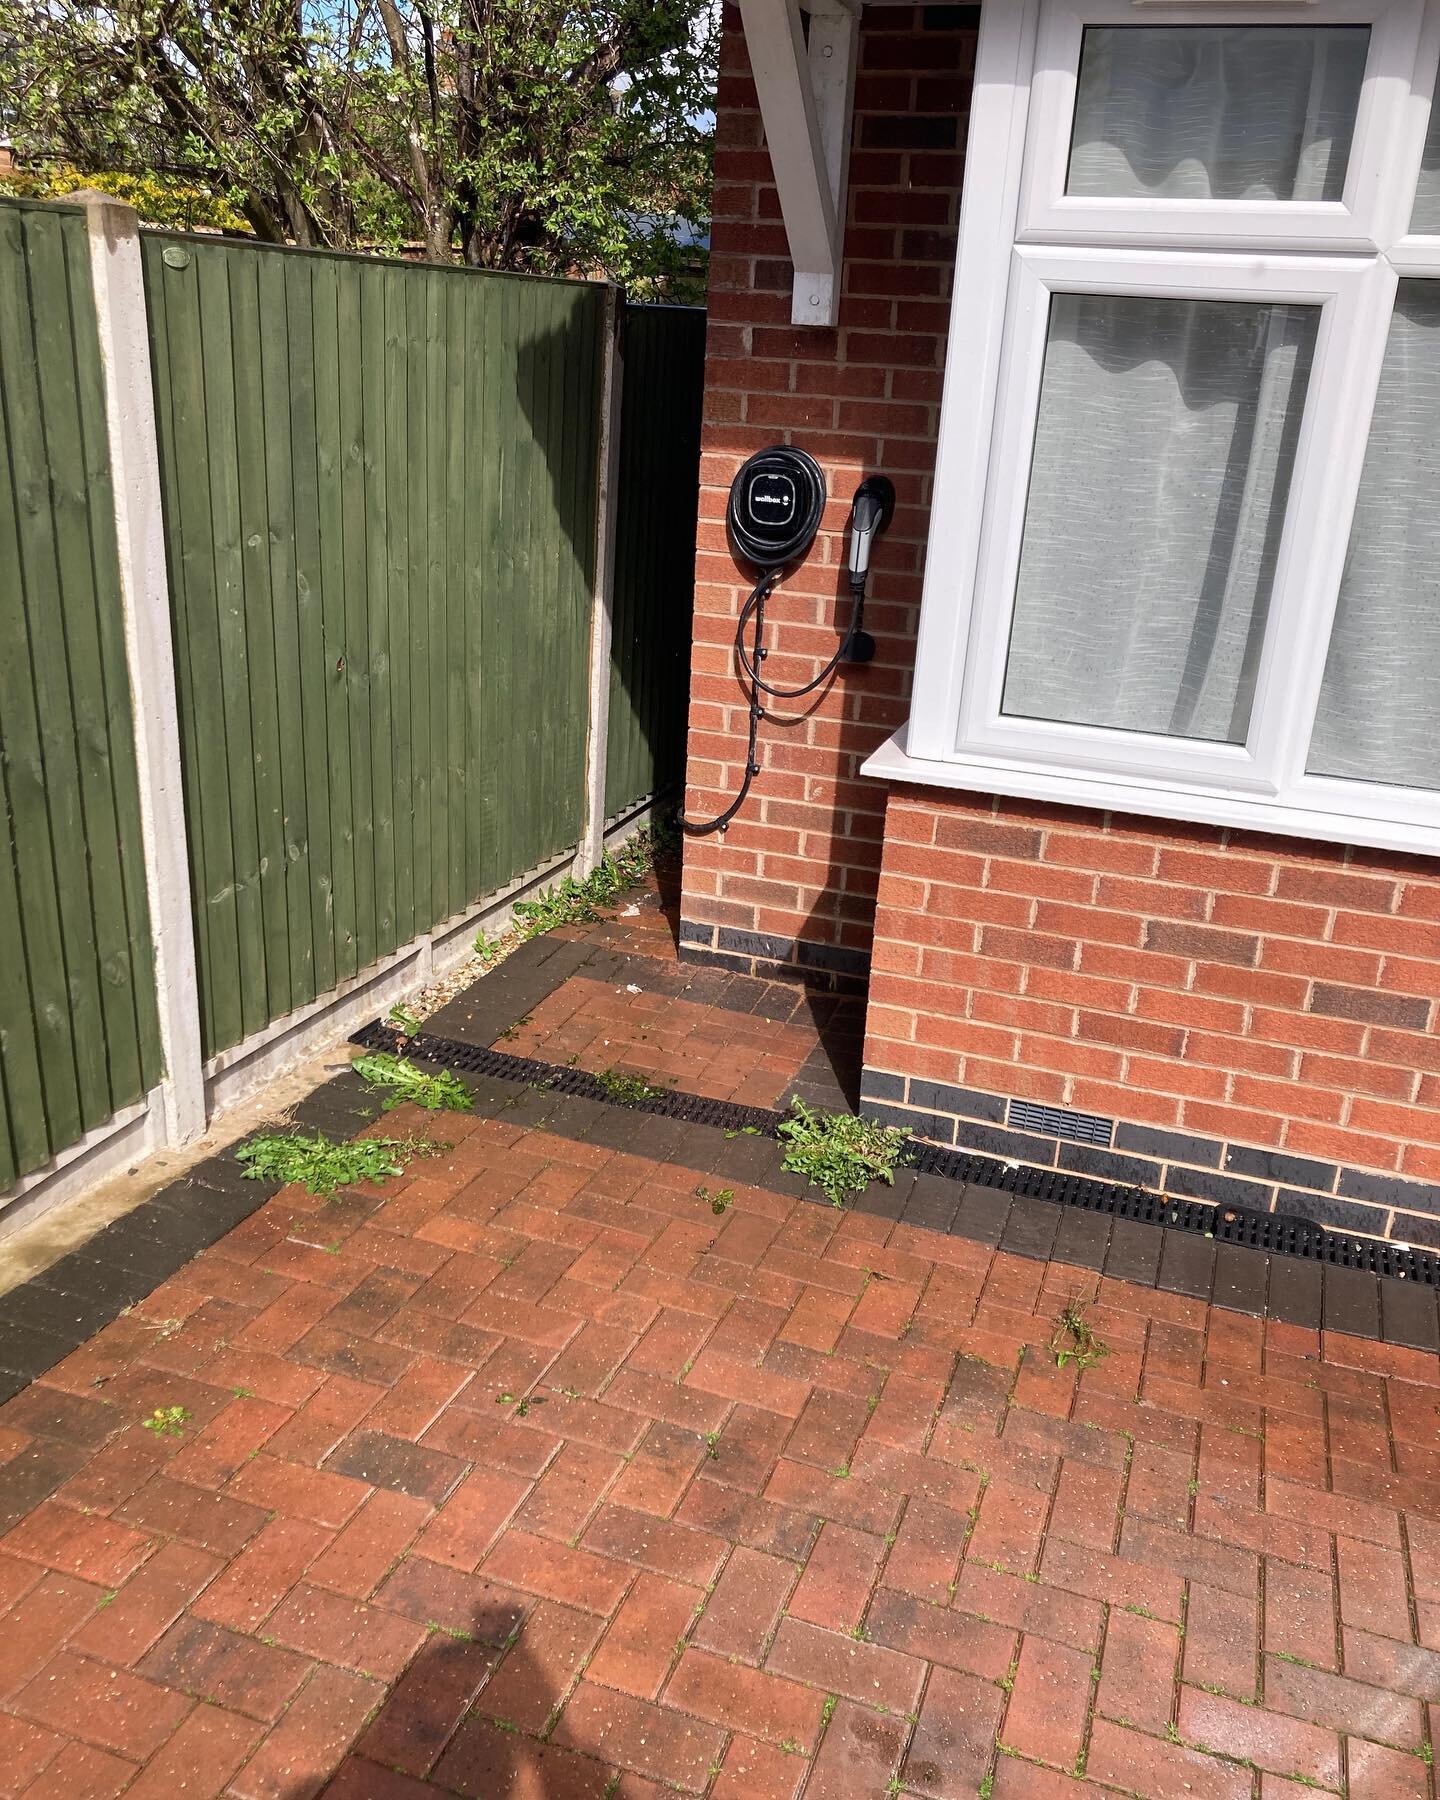 Another @wallboxchargers installed with a garo ip65 enclosure #evchargers #electricvehiclechargingstation #electrical #electrics #electriciannorthampton